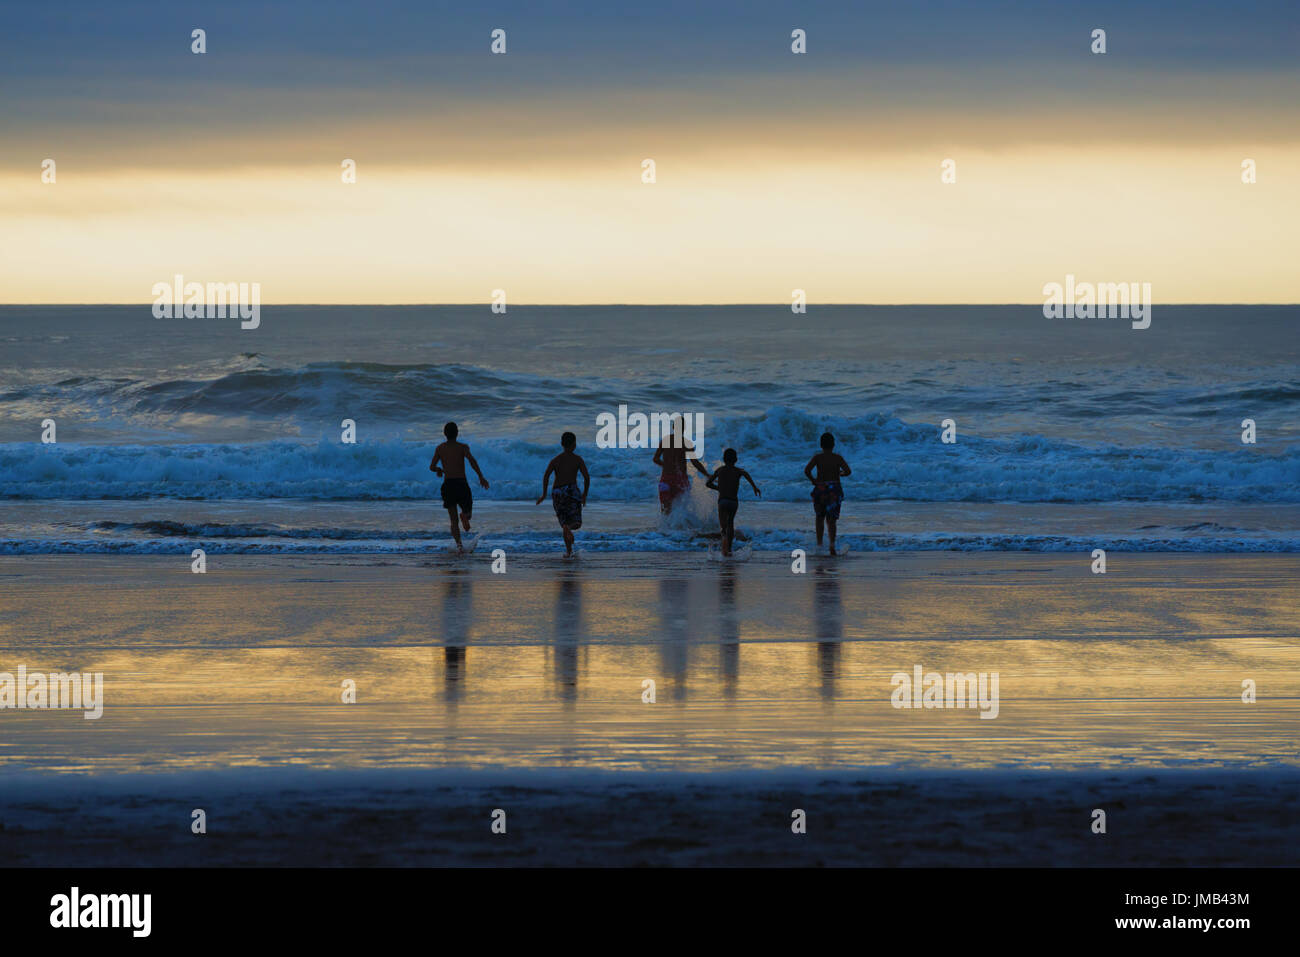 Silhouette of four young men (boys) at the beach running into the surf. Stock Photo